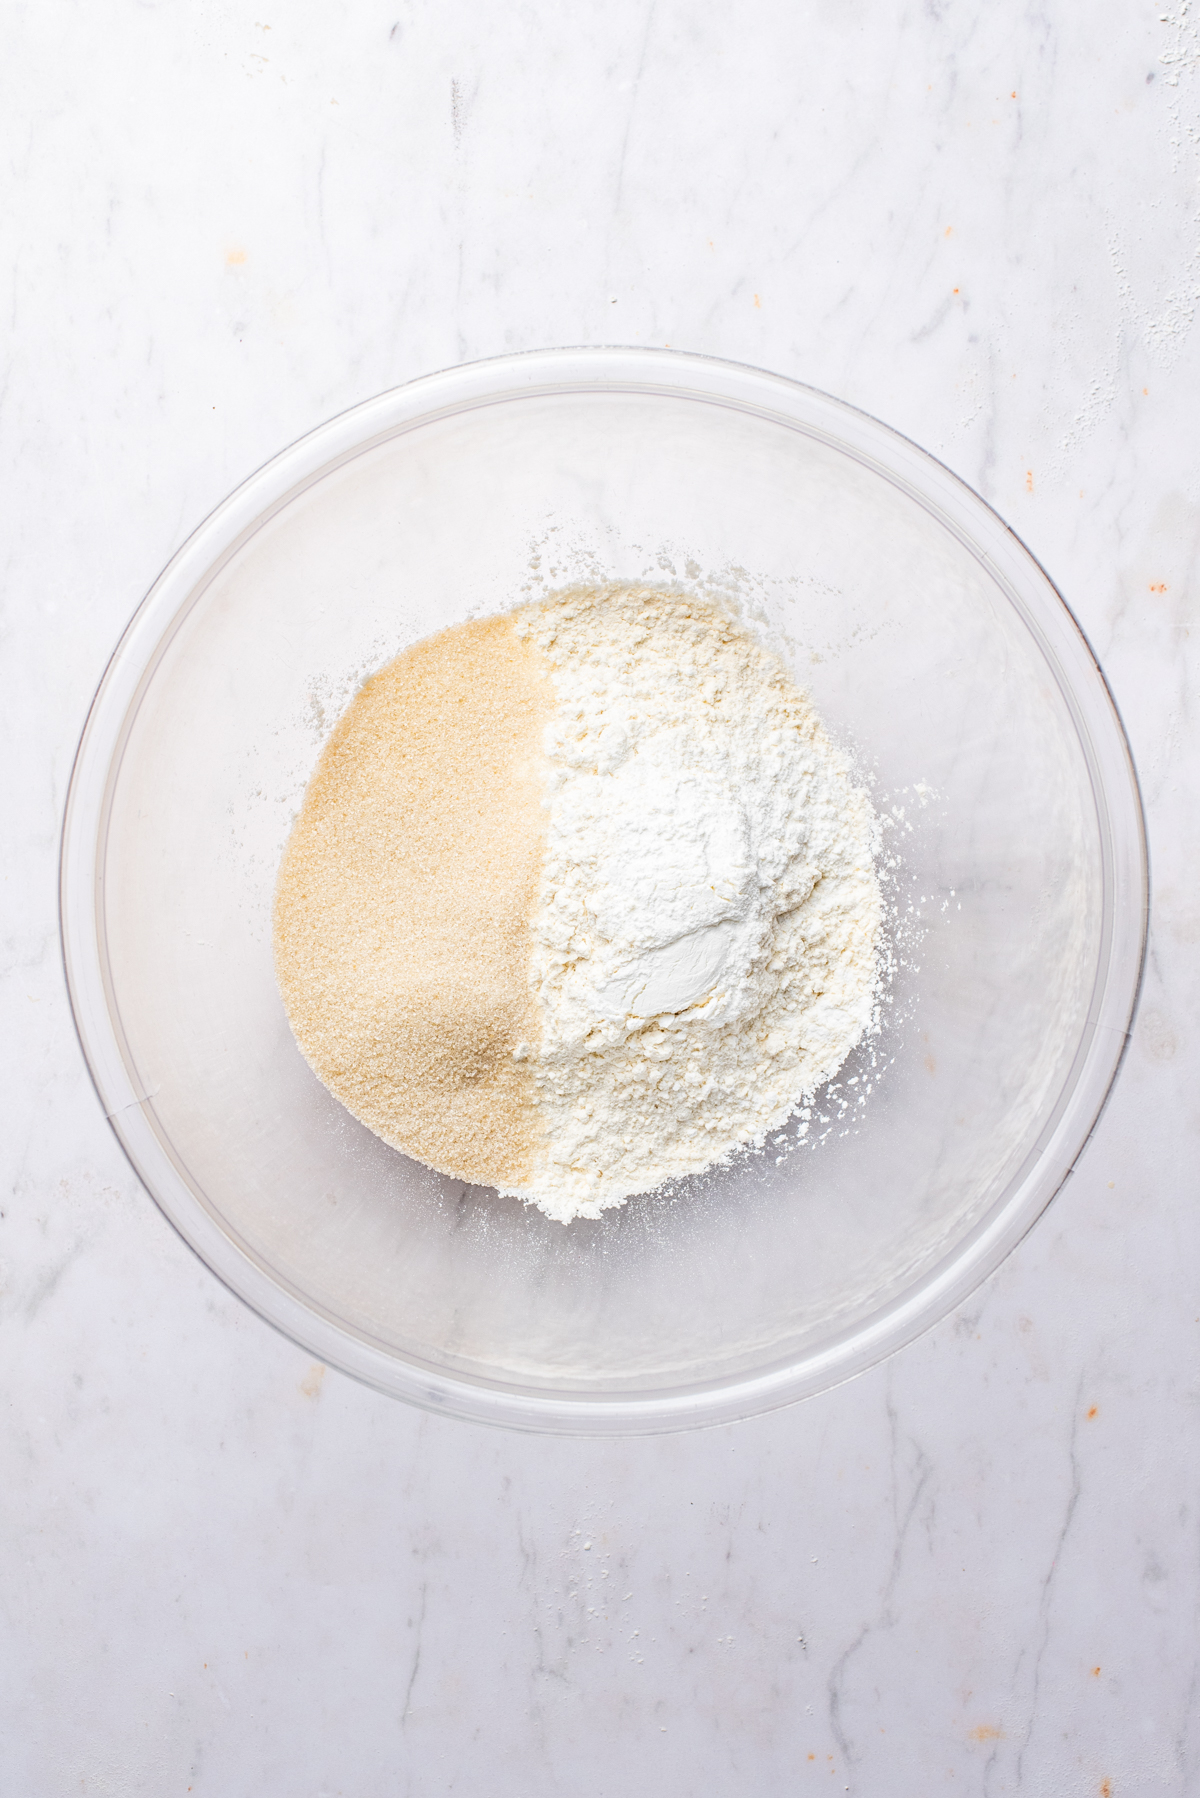 Flour, sugar, and baking powder in a large mixing bowl.